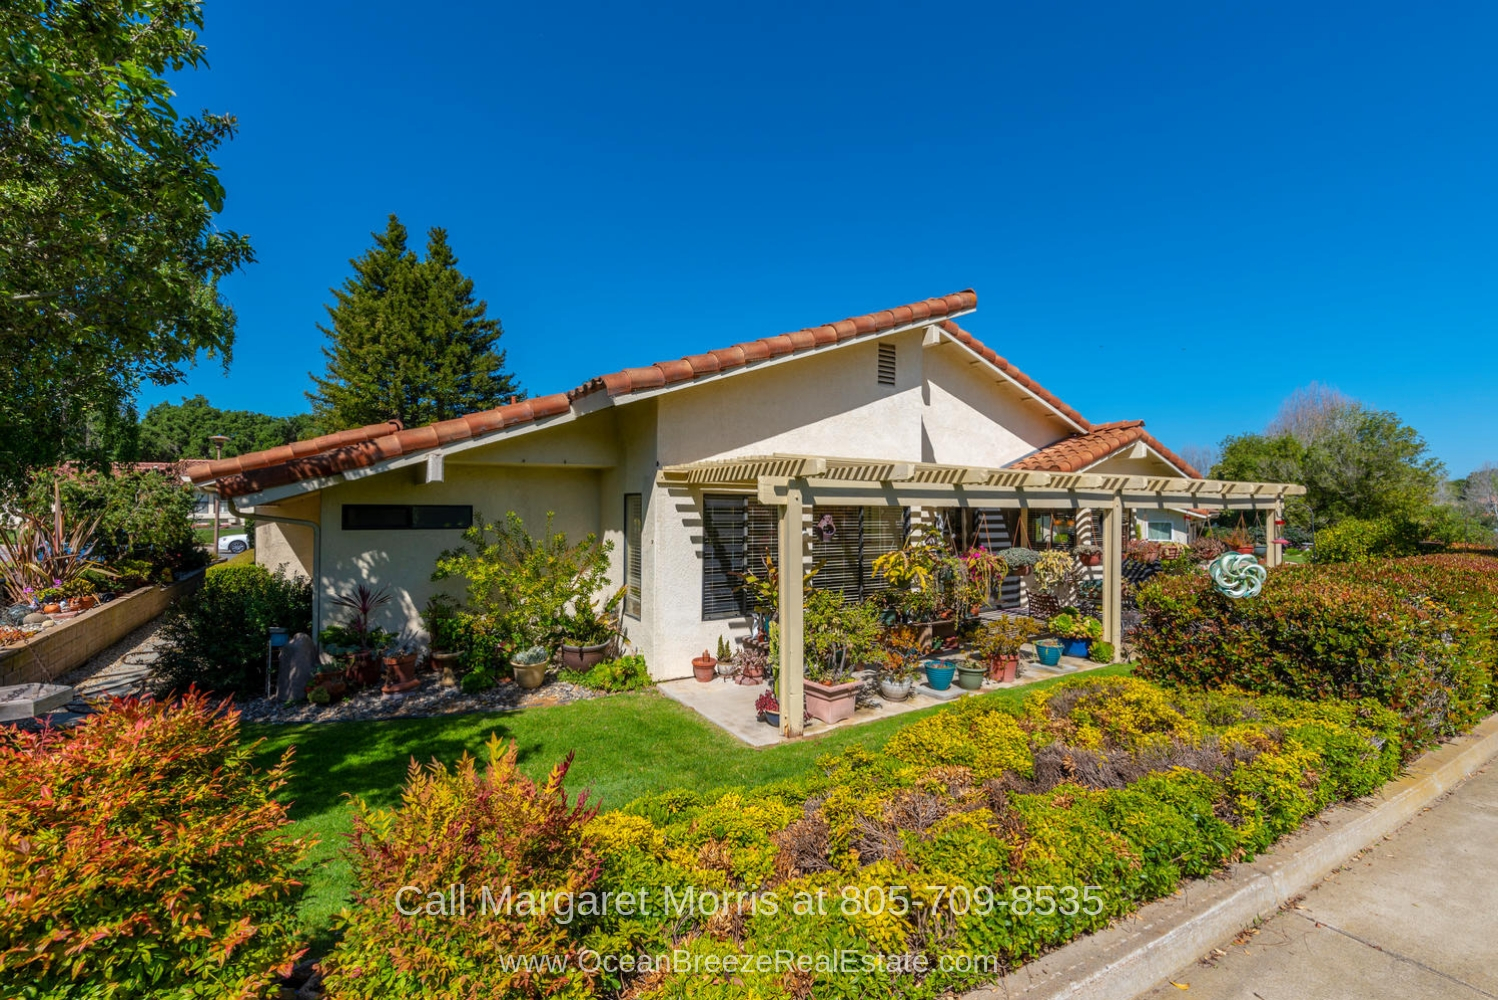 Golf Homes for Sale in Blacklake Nipomo CA - A perfect outdoor oasis is waiting for you in this home in Nipomo CA.